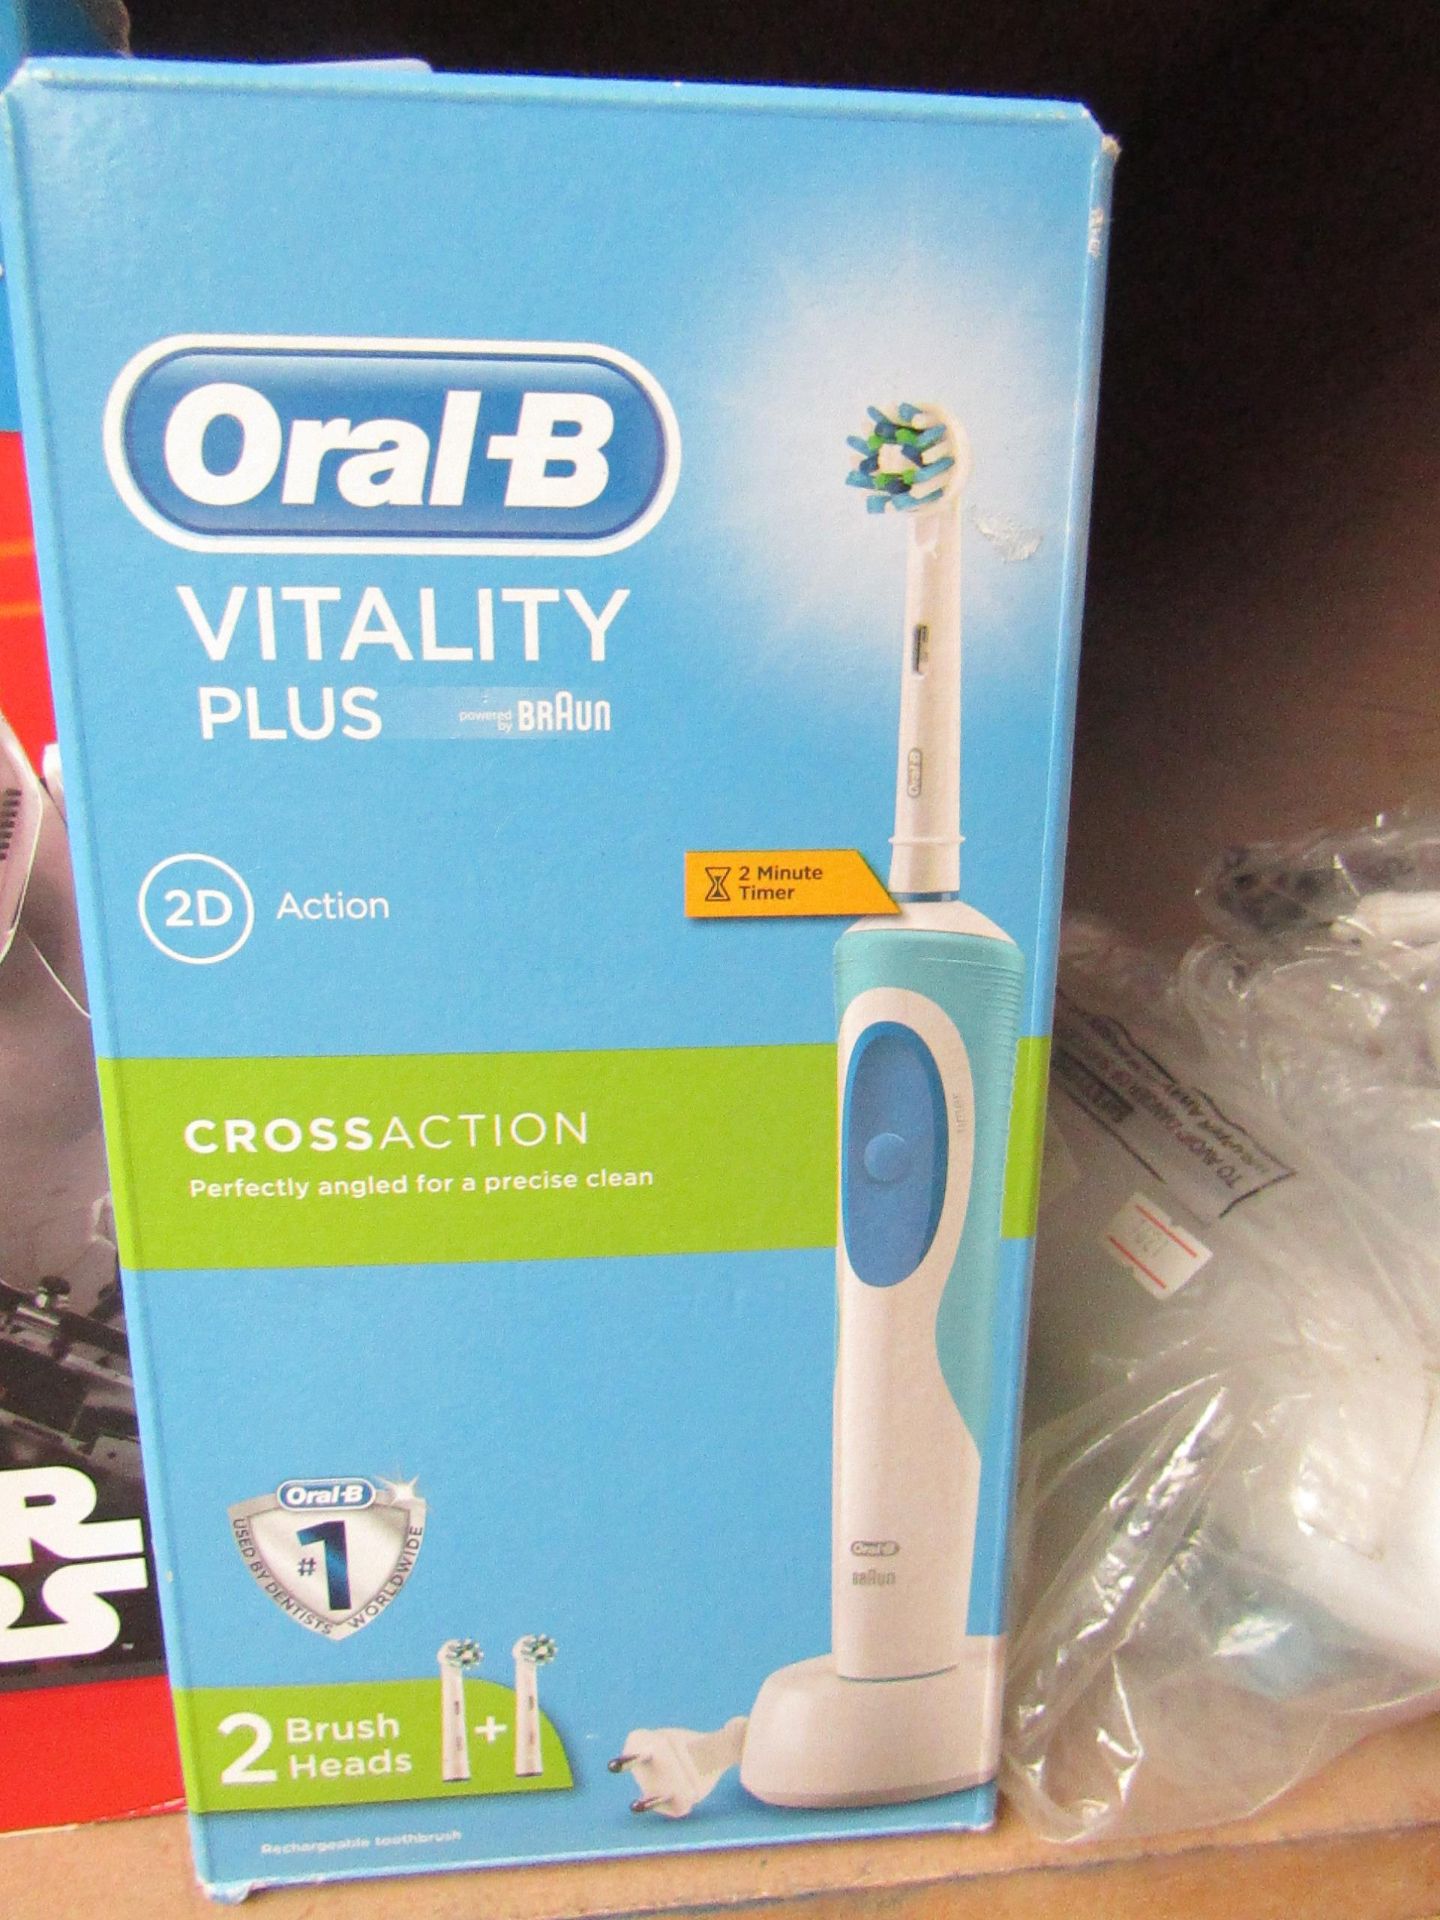 Oral-B Vitality Plus electric toothbrush, untested and boxed.